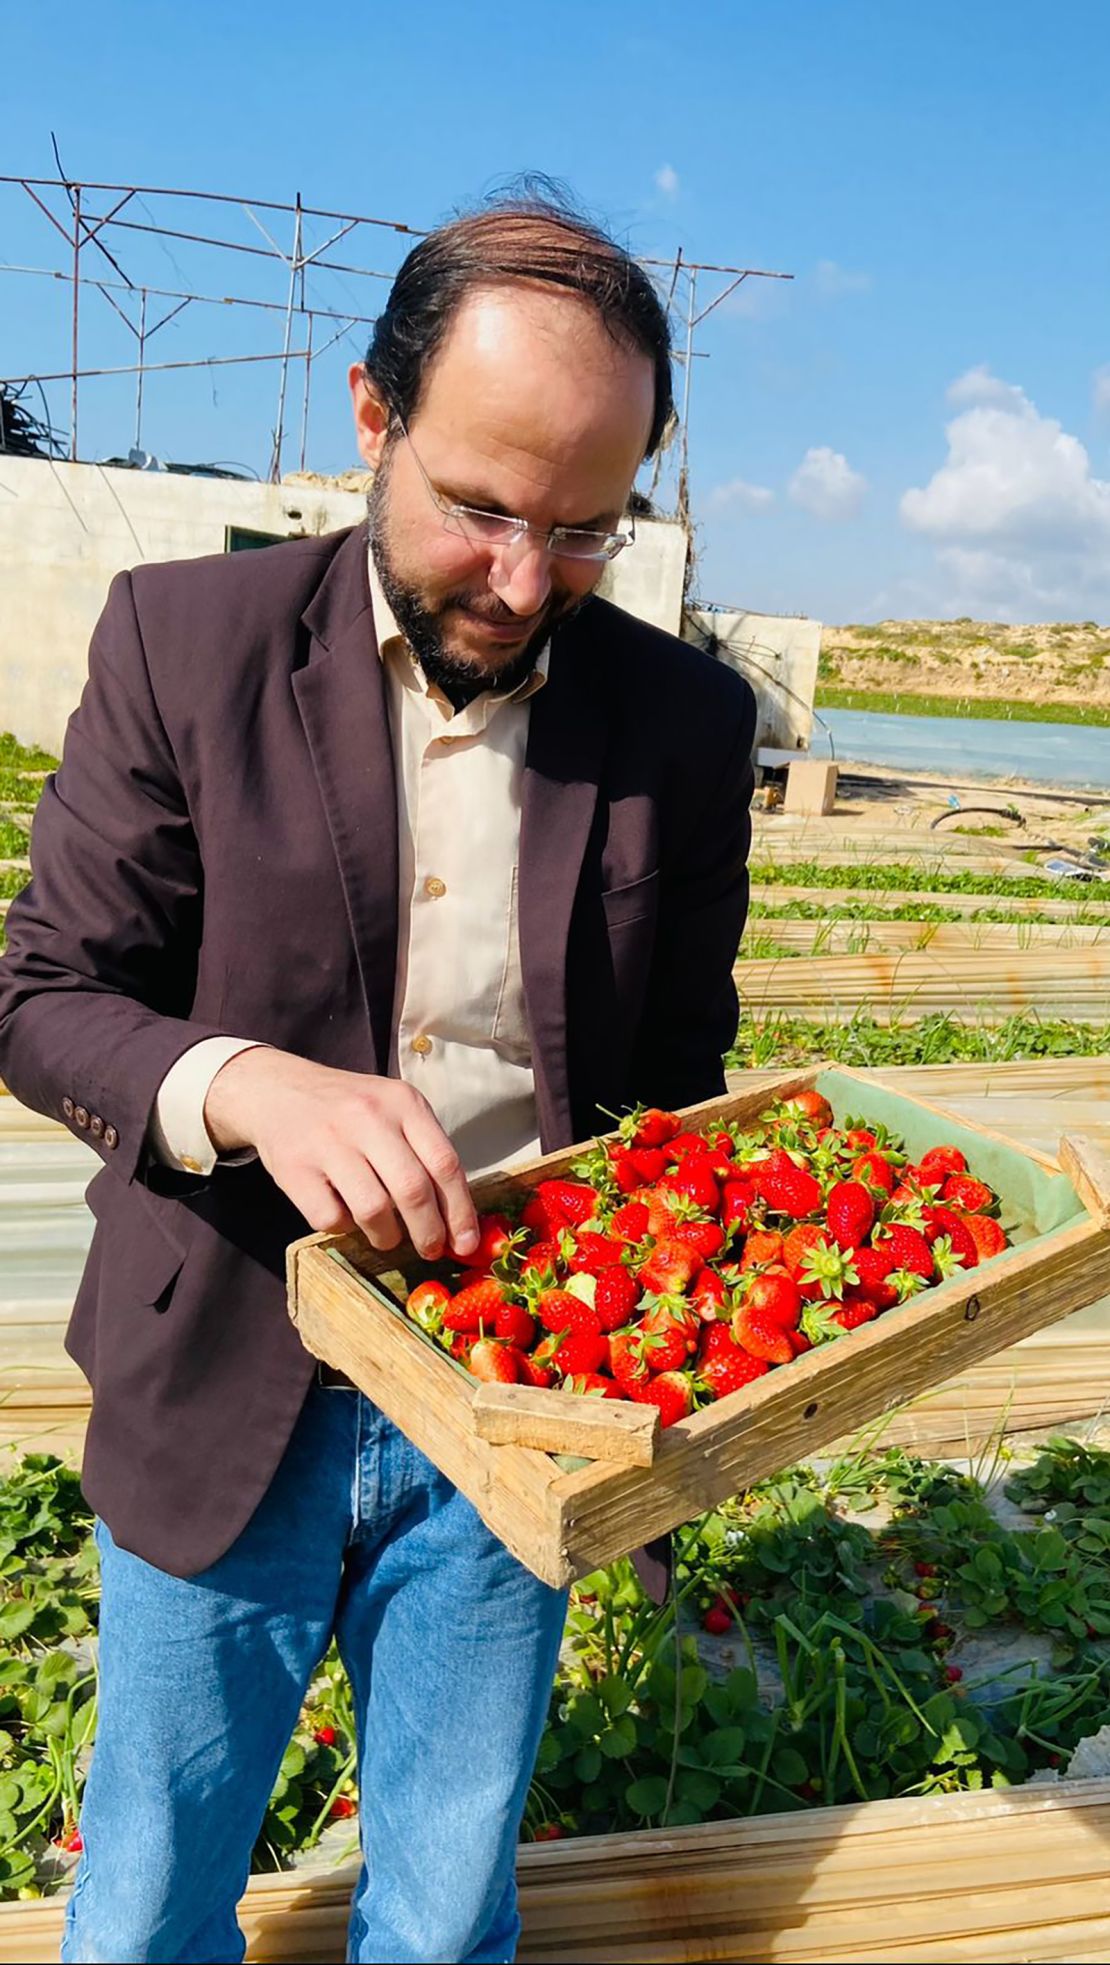 Refaat Al-Areer, a prominent Palestinian professor, poet and writer, was killed in an airstrike, in northern Gaza, on December 7. His friend and colleague, Mosab Abu Toha, took this photo of Al-Areer picking strawberries in Gaza, on March 27, 2022.